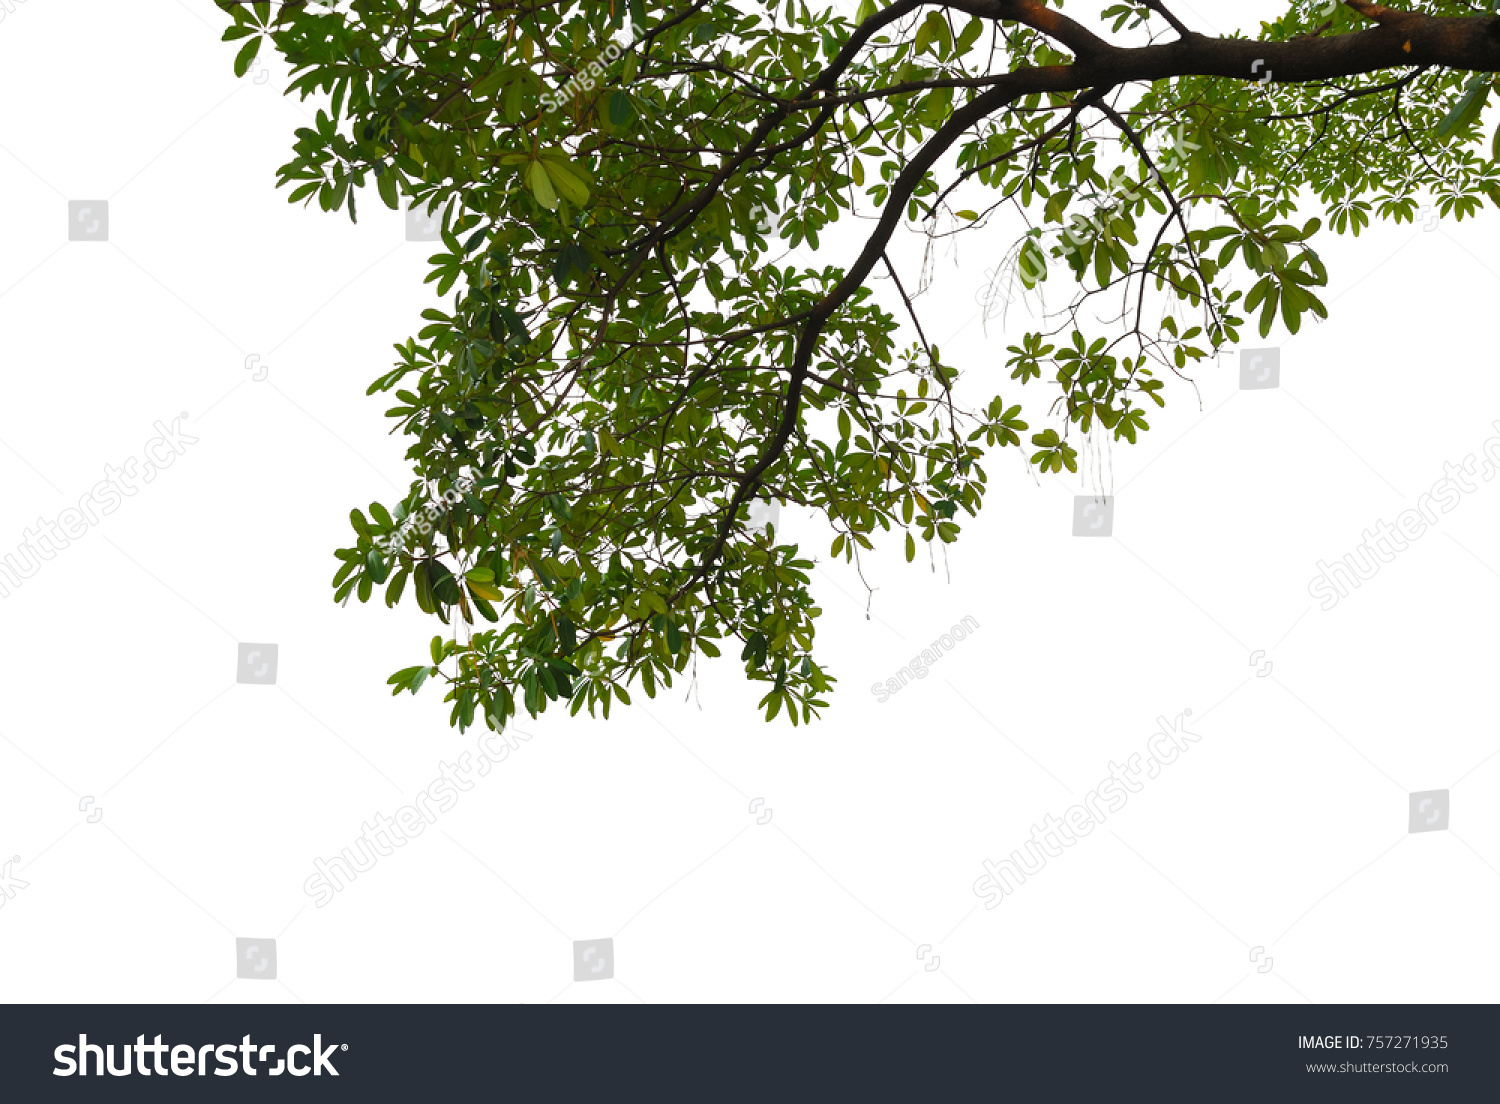 Tree leaves and branch pendant foreground isolated on white for park or garden decorative with clipping path, (Alstonia scholaris, White cheesewood, Black board tree) #757271935